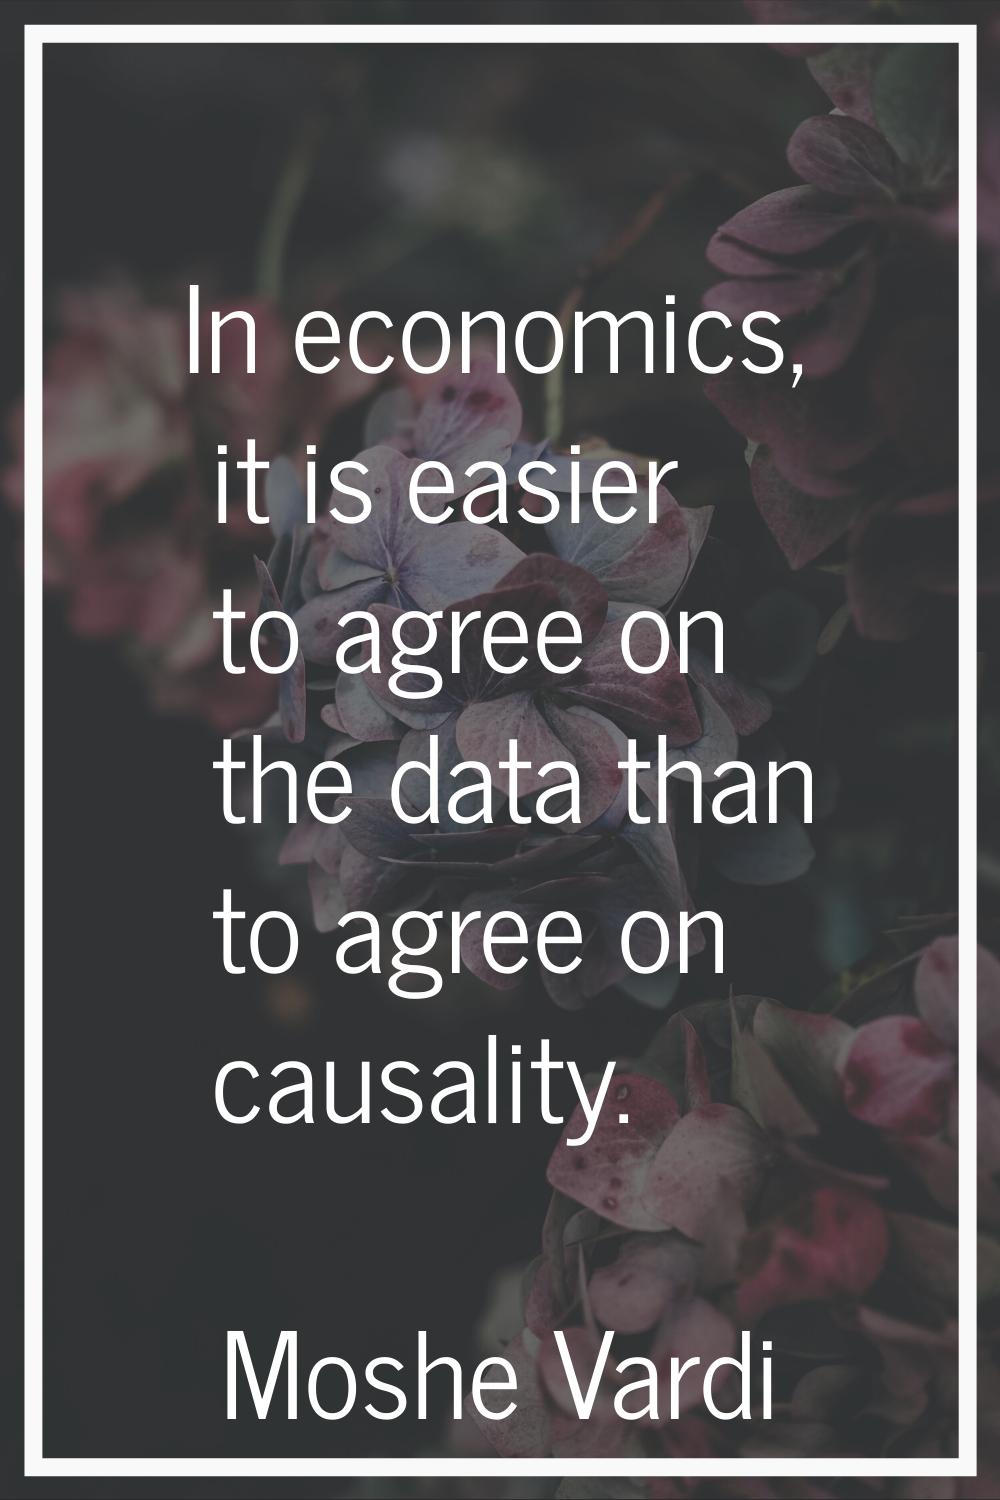 In economics, it is easier to agree on the data than to agree on causality.